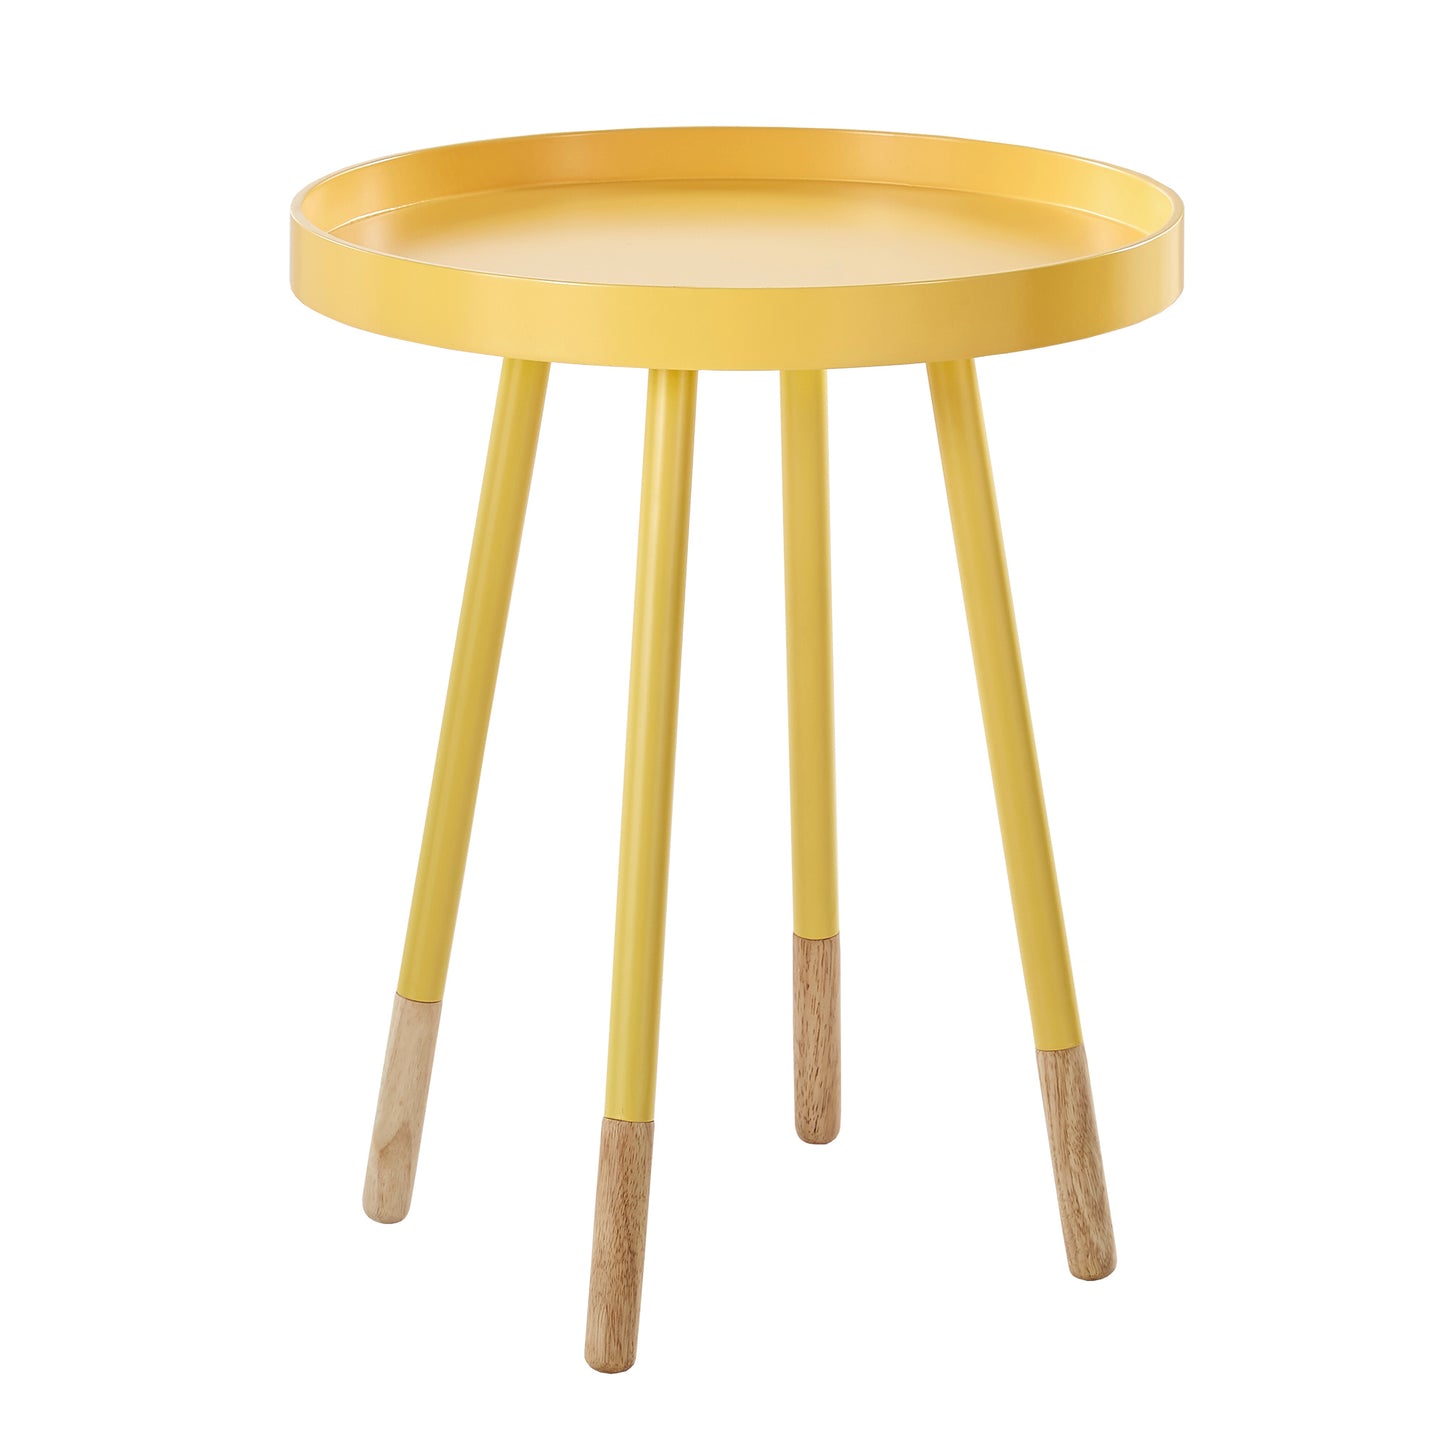 Paint-Dipped Round Tray-Top End Table - Banana Yellow